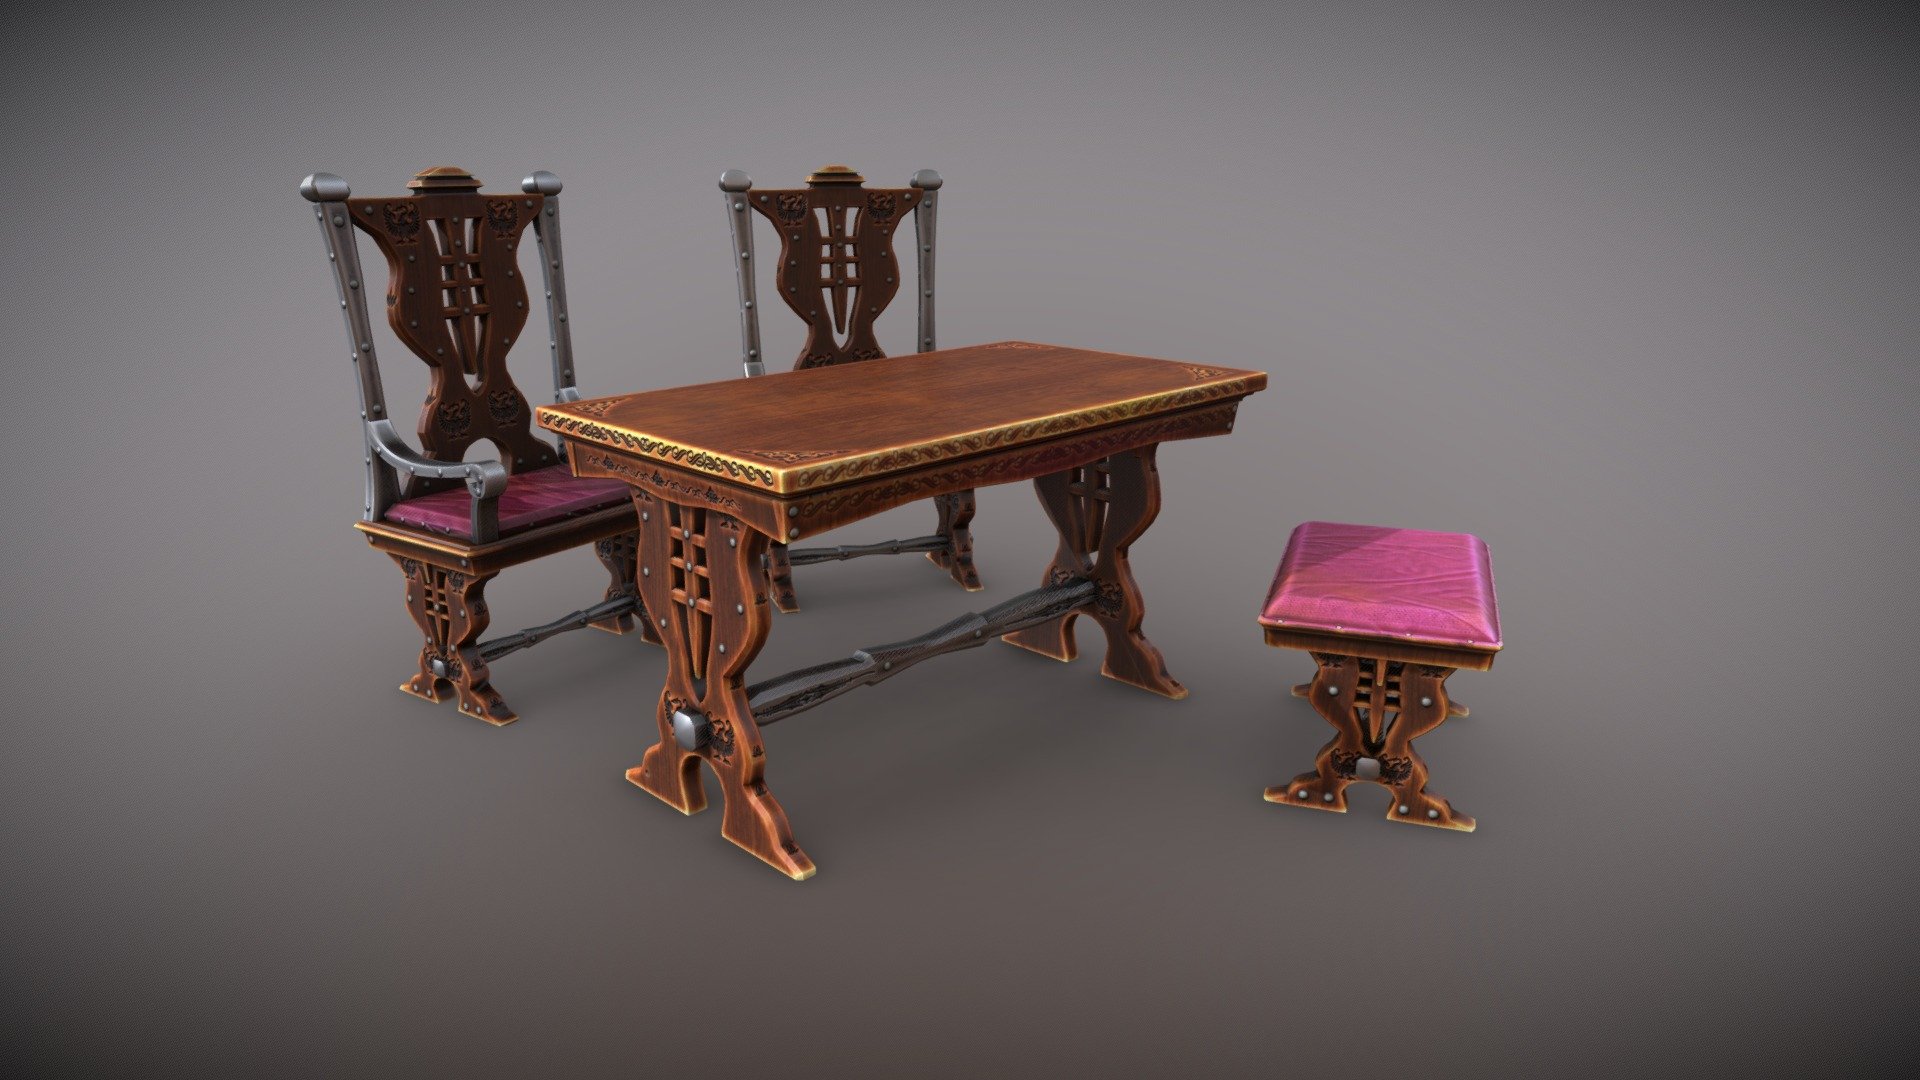 **Game-ready table set model with only one material.
 **
Including 1 big table, 2 chairs and 1 stool.
 
Including Albedo, Normal, Metallic, Height and Ambient-Occlusion maps in Targa format.


Technical details:

Number of meshes: 1

Number of materials: 1

Number of textures: 5

Texture size:2048 * 2048 px

Texture format: Targa

Poly-count:

Table:4412

Chair1:7556

Chair2:7556

Stool:3480
 - Table Set - Buy Royalty Free 3D model by Dexsoft Games (@dexsoft-games) 3d model